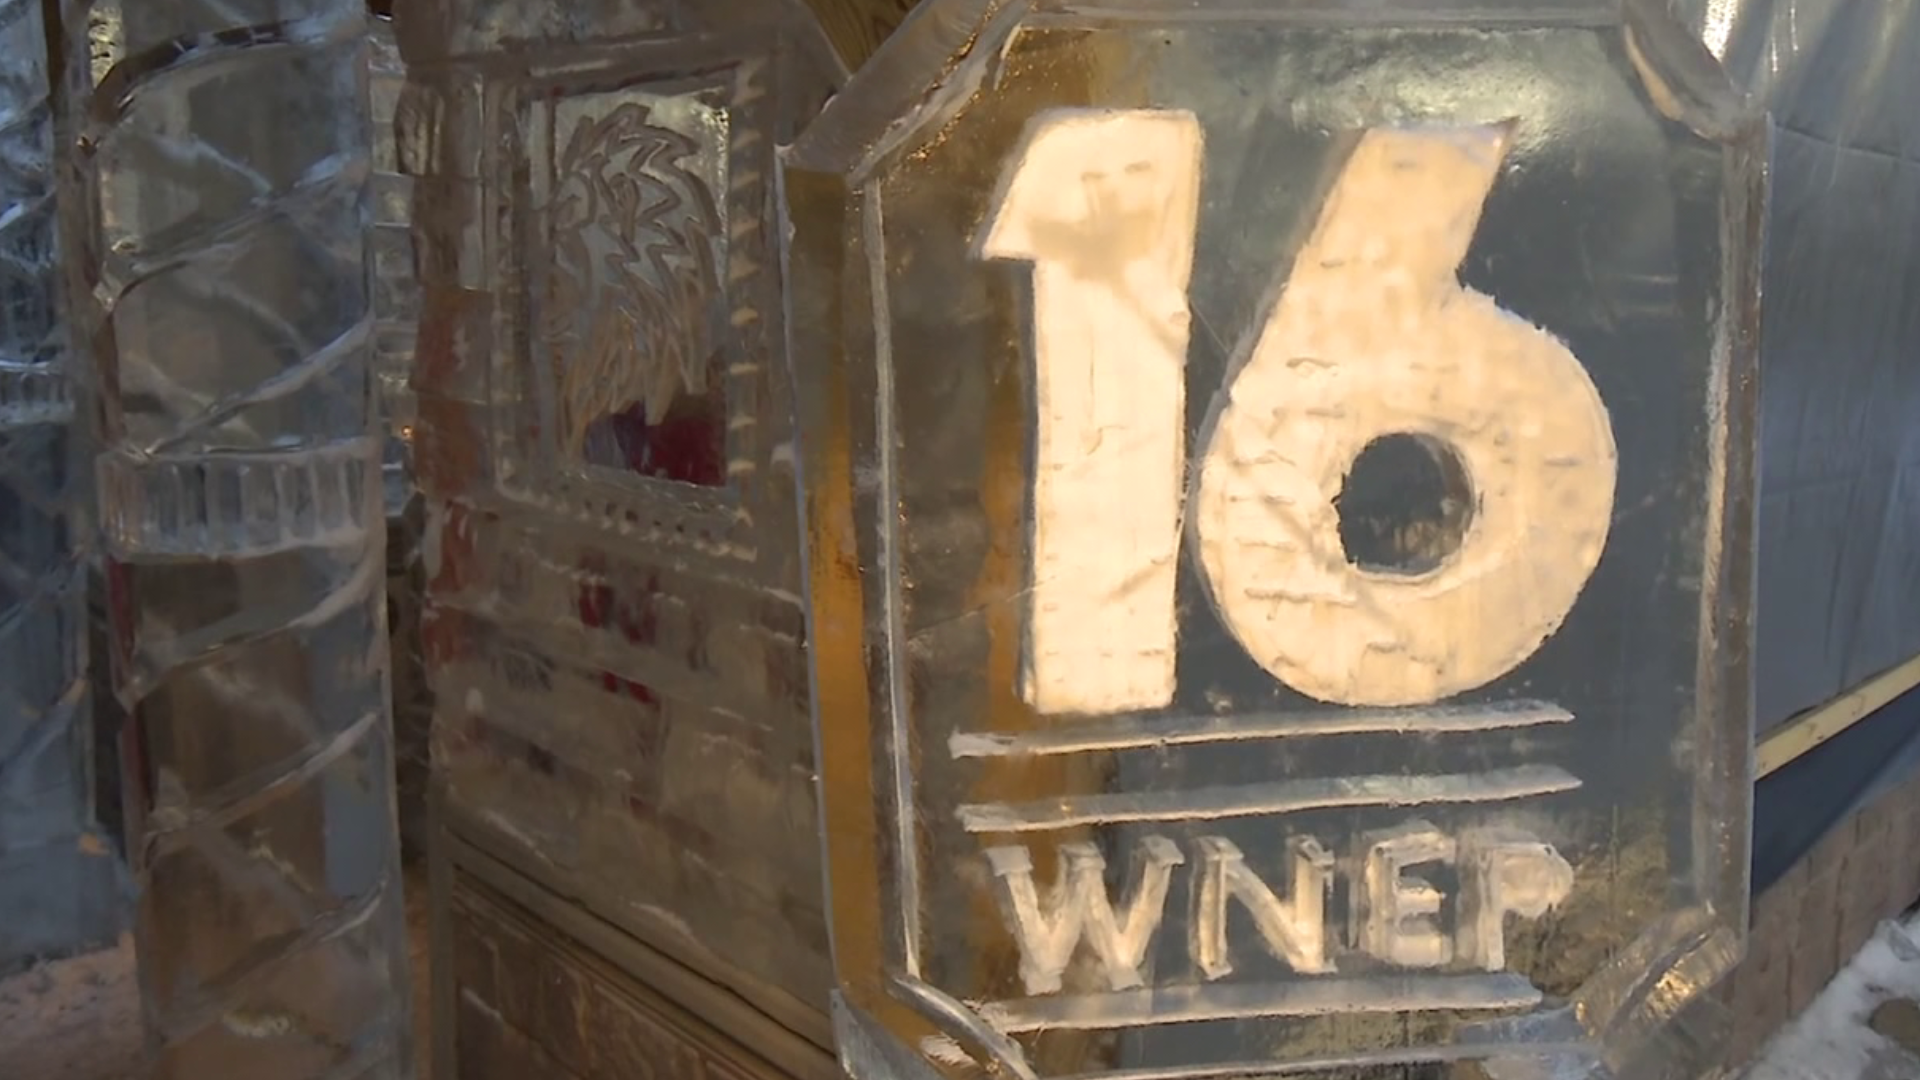 A restaurant in Luzerne County has made ice carvings each winter since 1986.